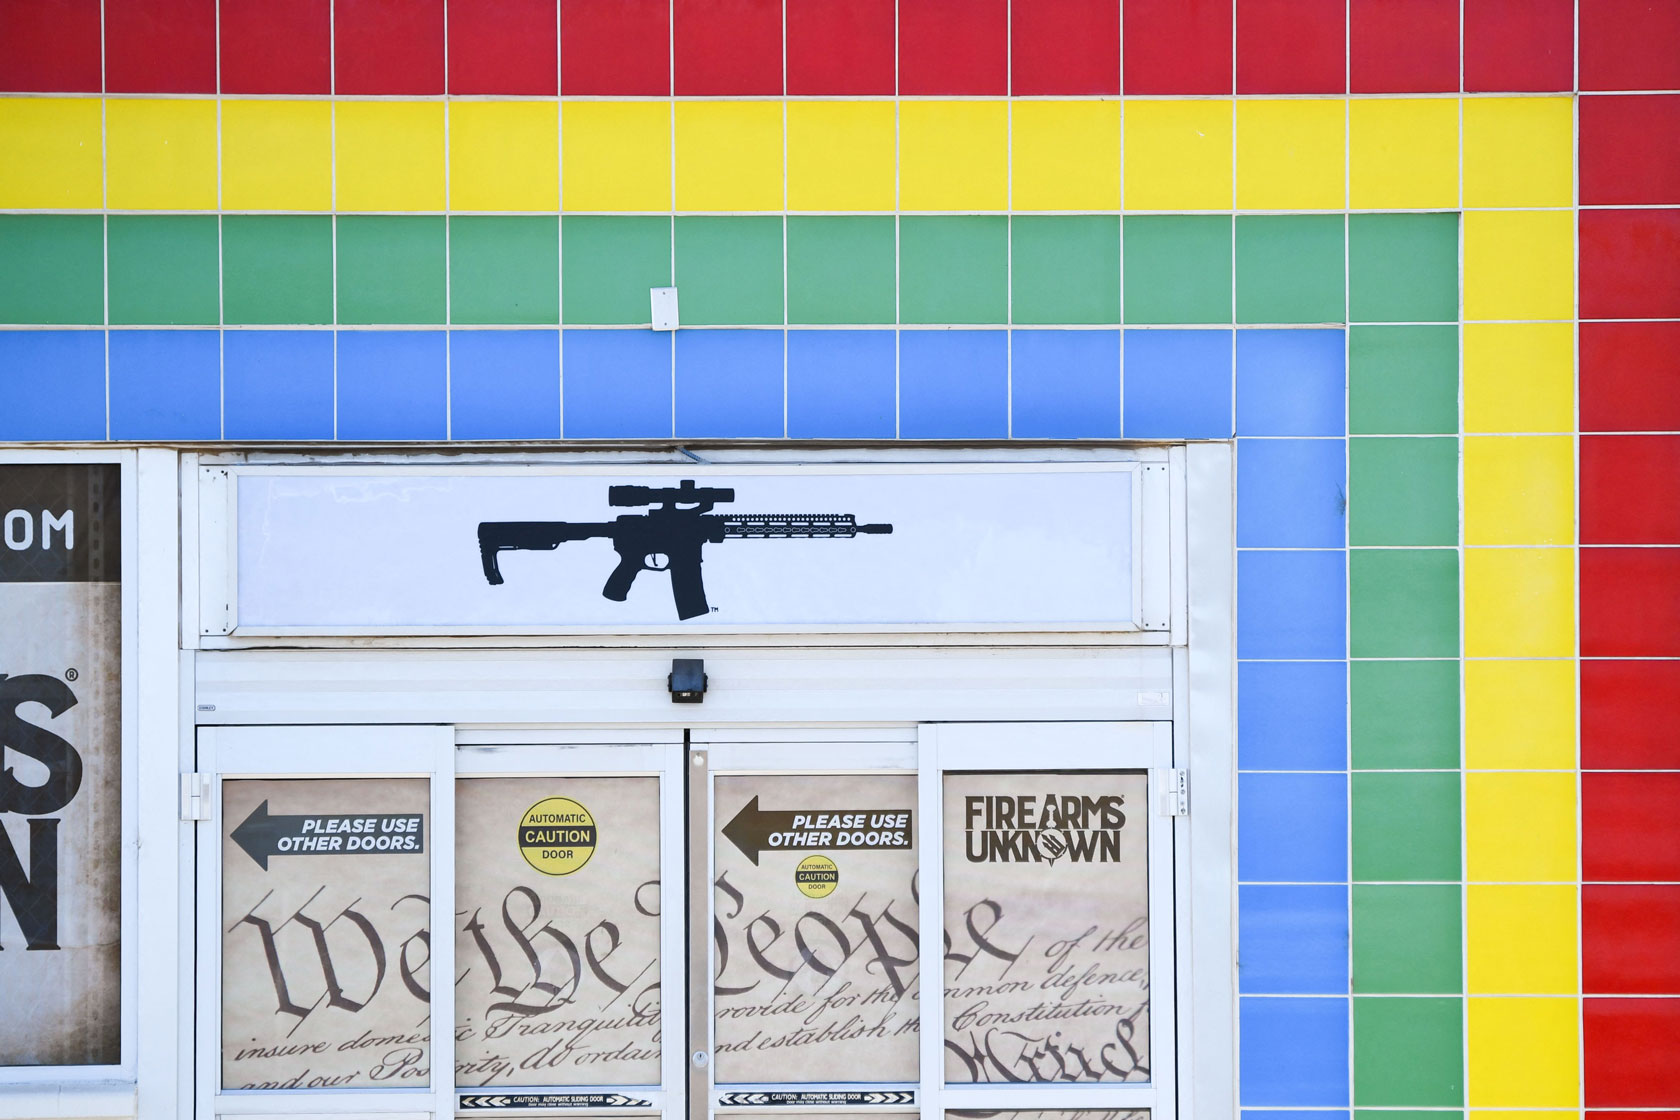 An AR-15-style rifle is displayed on signage for an Arizona gun store.